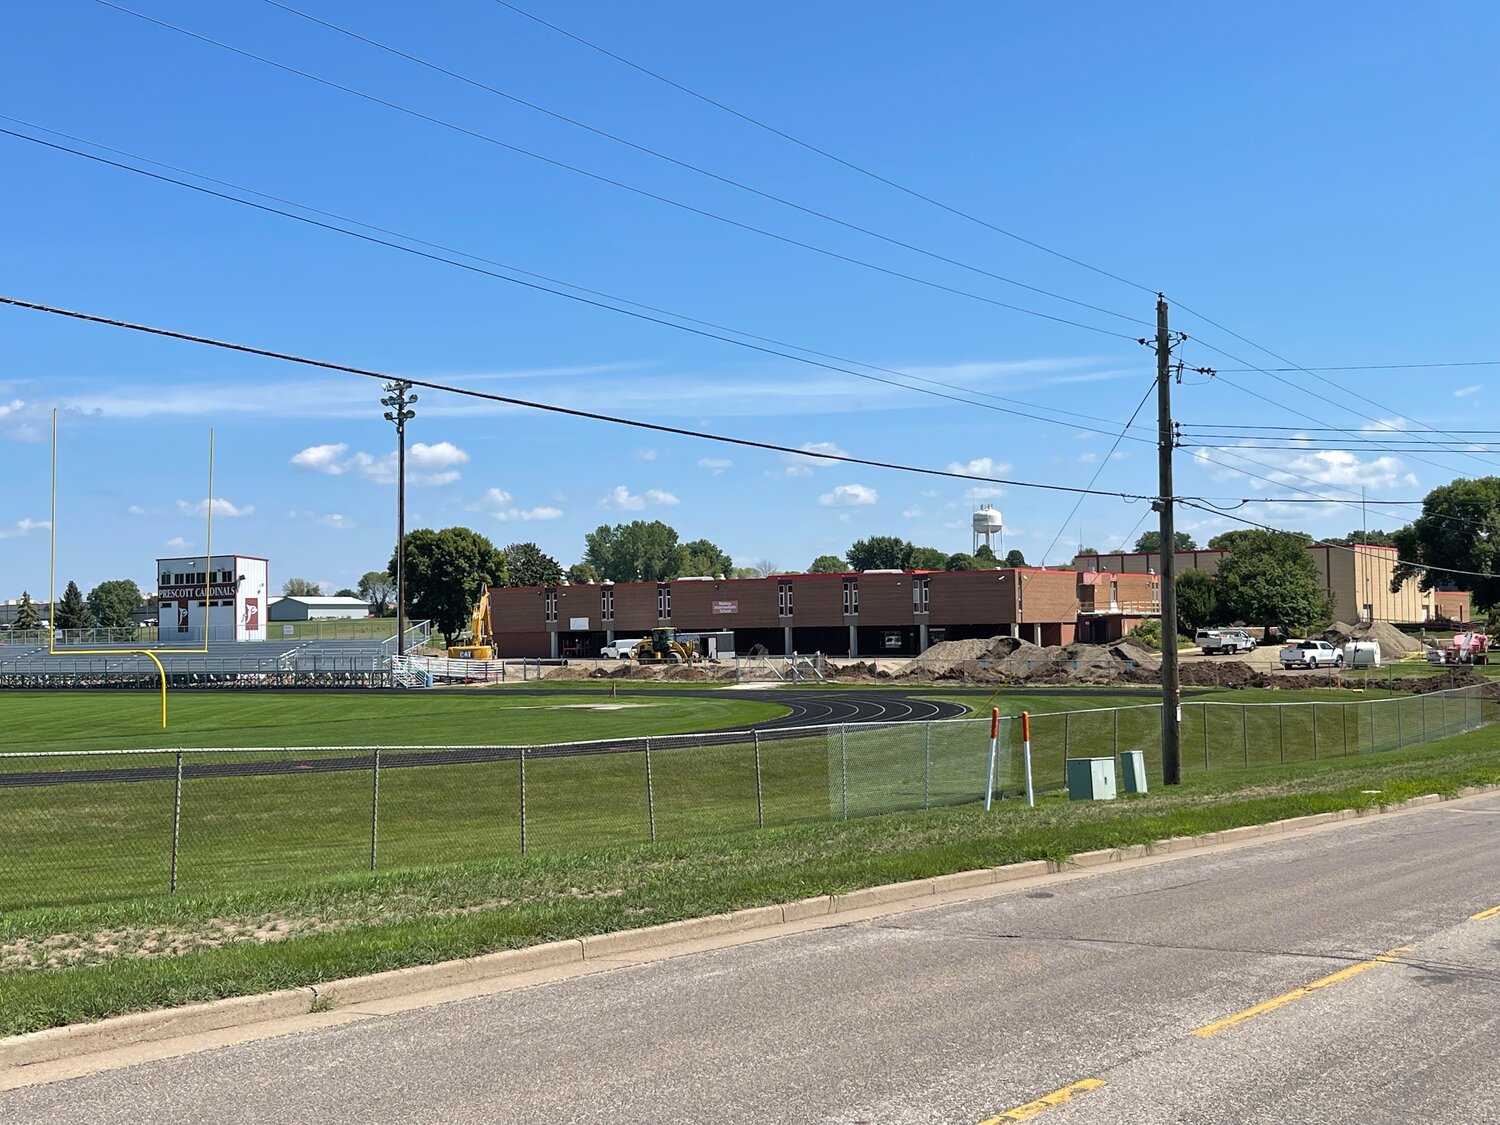 The Prescott High School football team won’t play a game at Laney Field until the fifth game of the season, Sept. 15. Construction at the Prescott Middle School is in full swing this summer, making the field inaccessible.